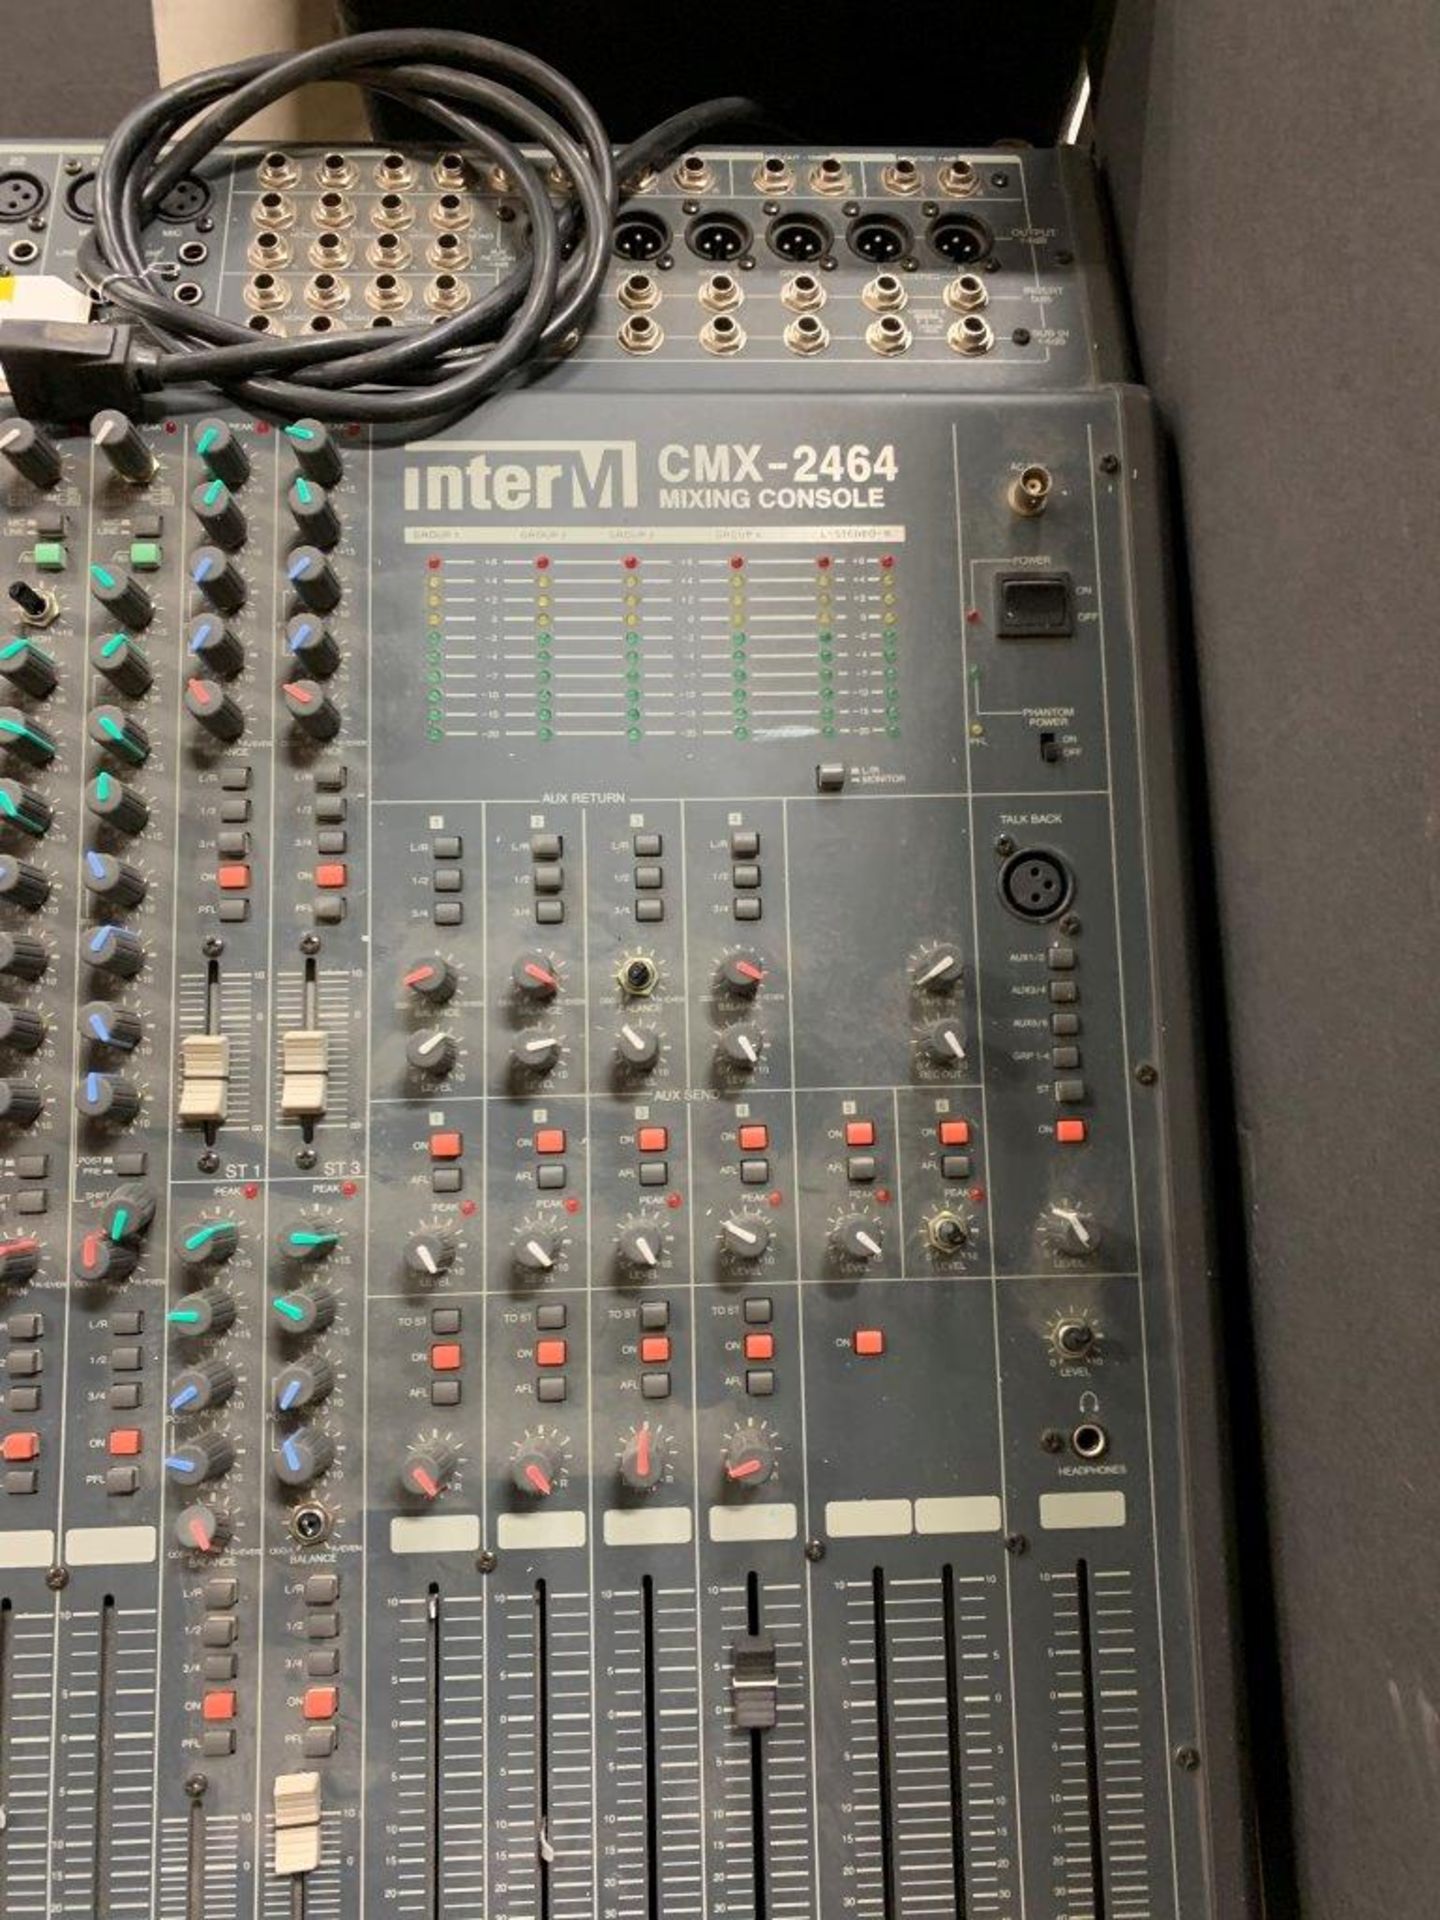 INTER M CMX -2464 AUDIO MIXING CONSOLE SOUND BOARD - Image 3 of 3